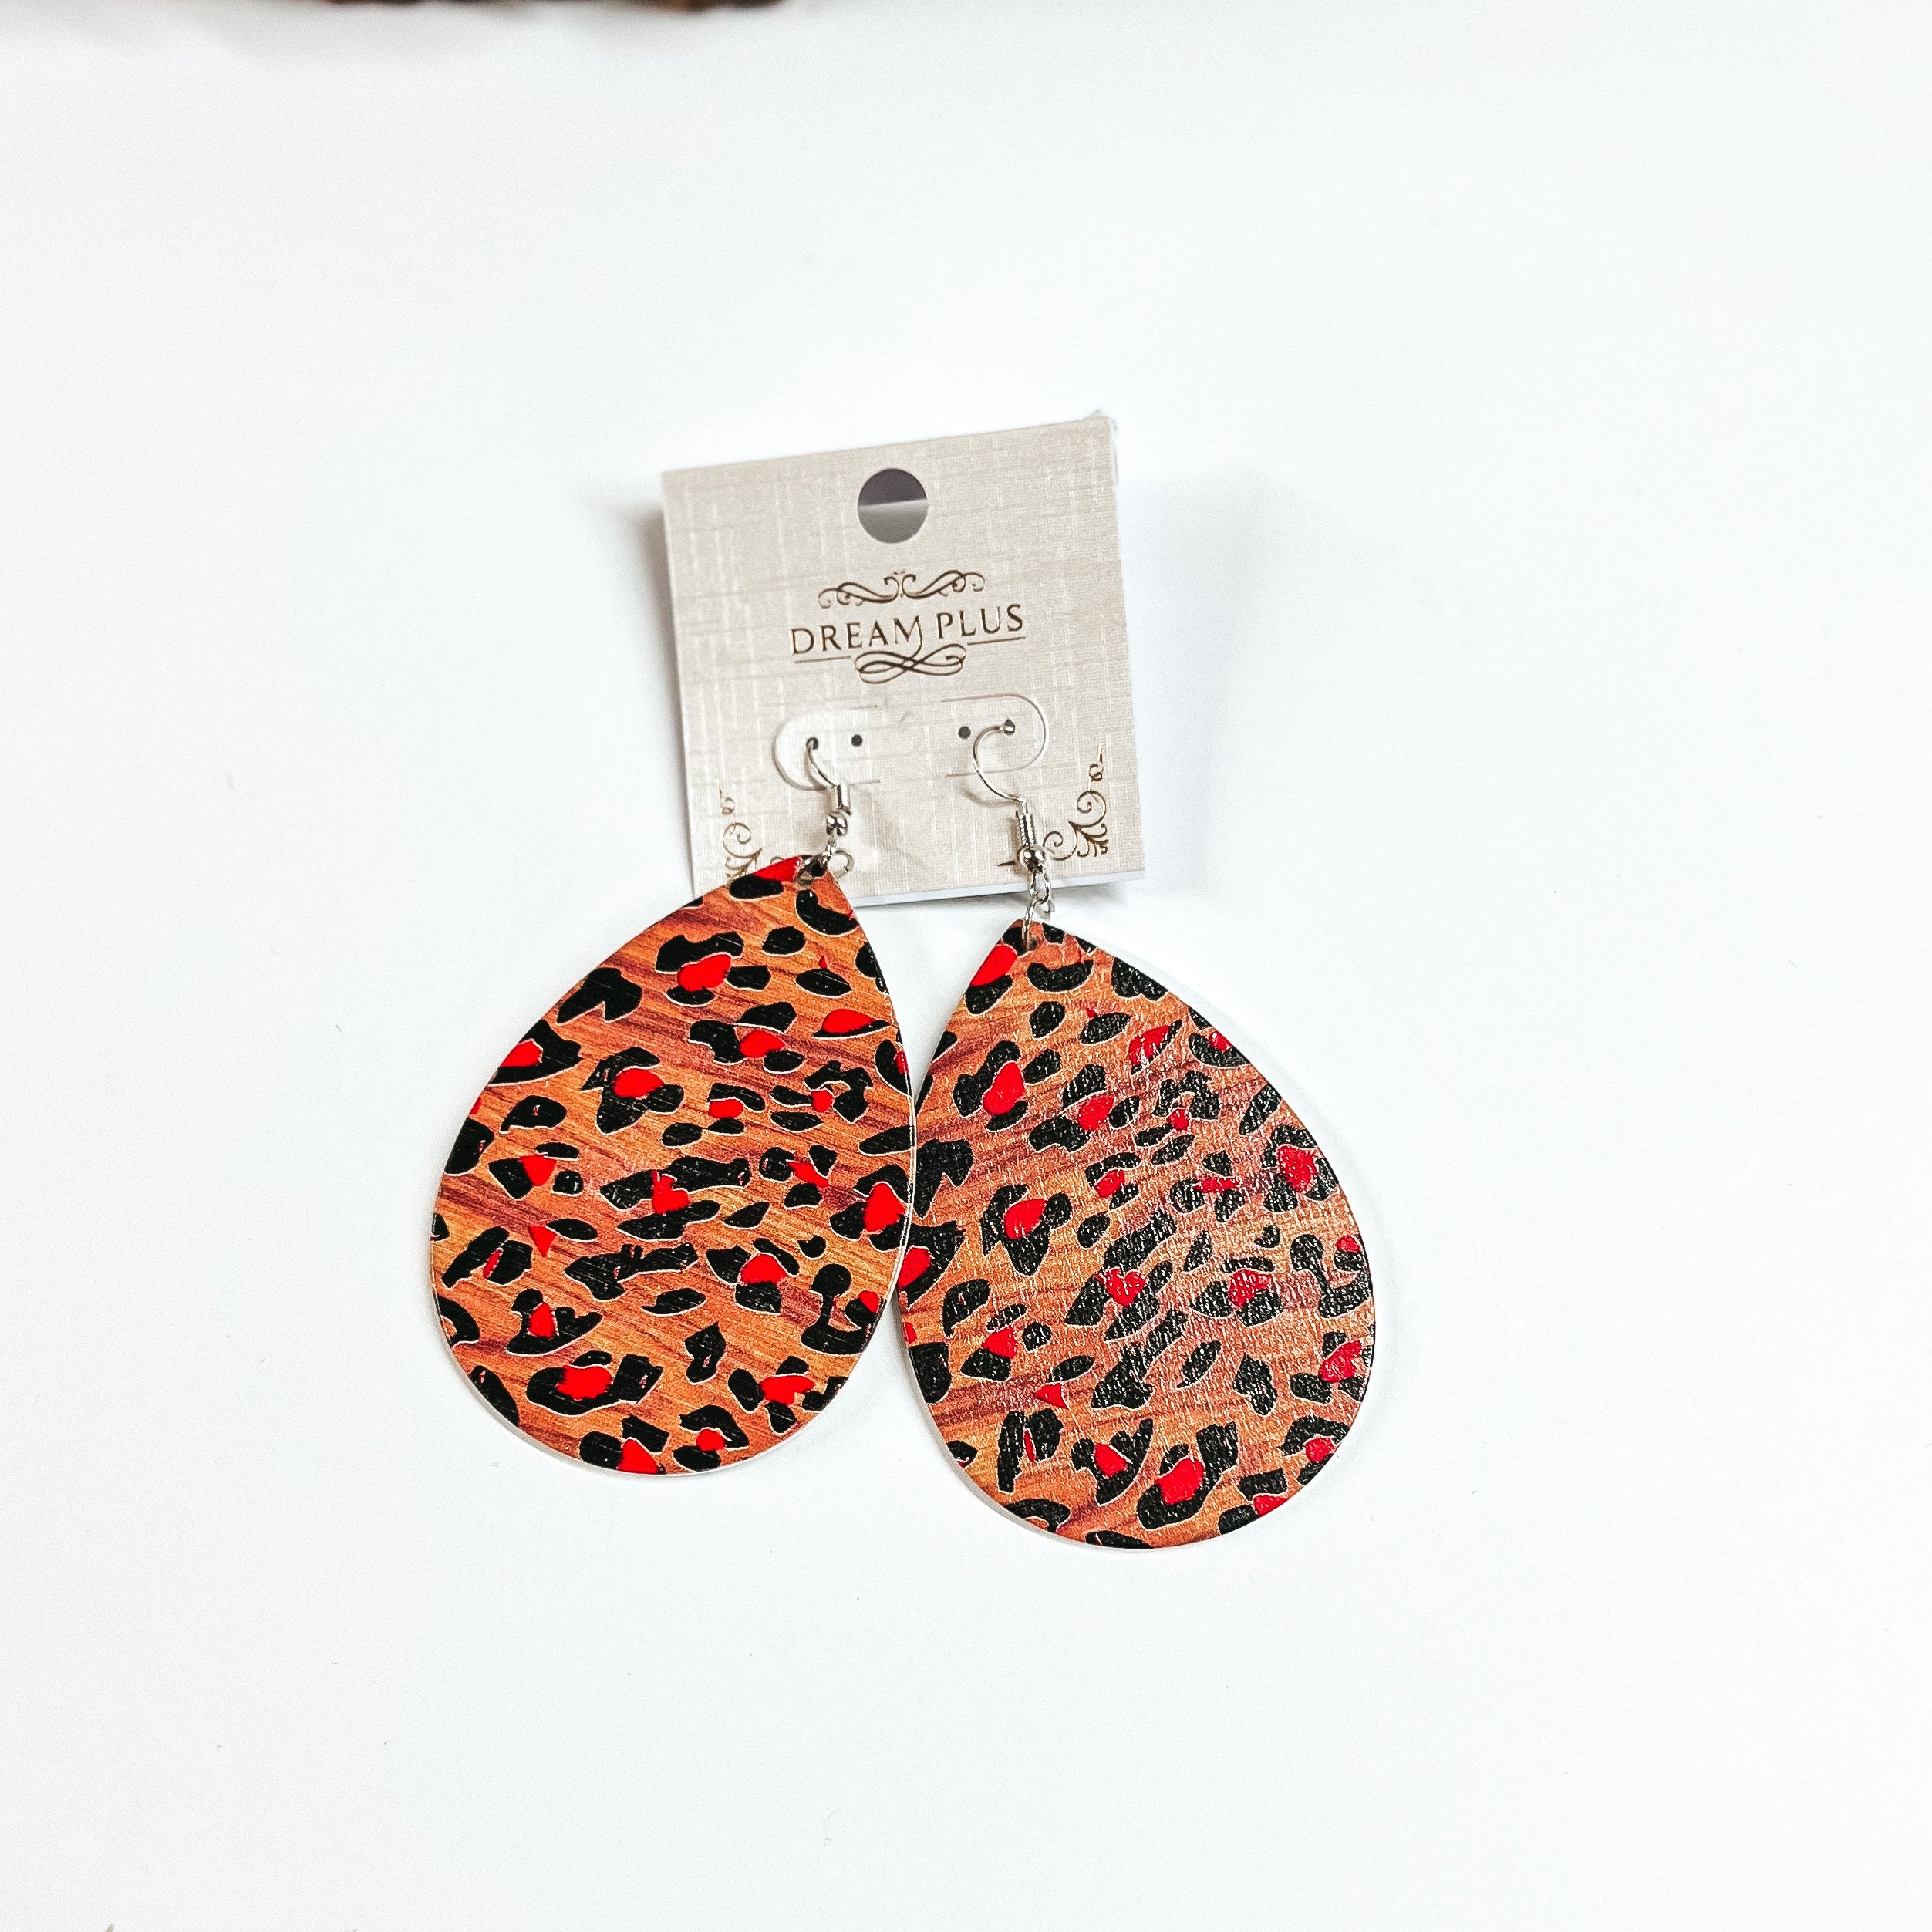 These are brown wooden teardrop earrings in leopard print and red detailing. These earrings are placed on a white earring card holder, they are laying on a  white background with a slab of wood in the back as decor.